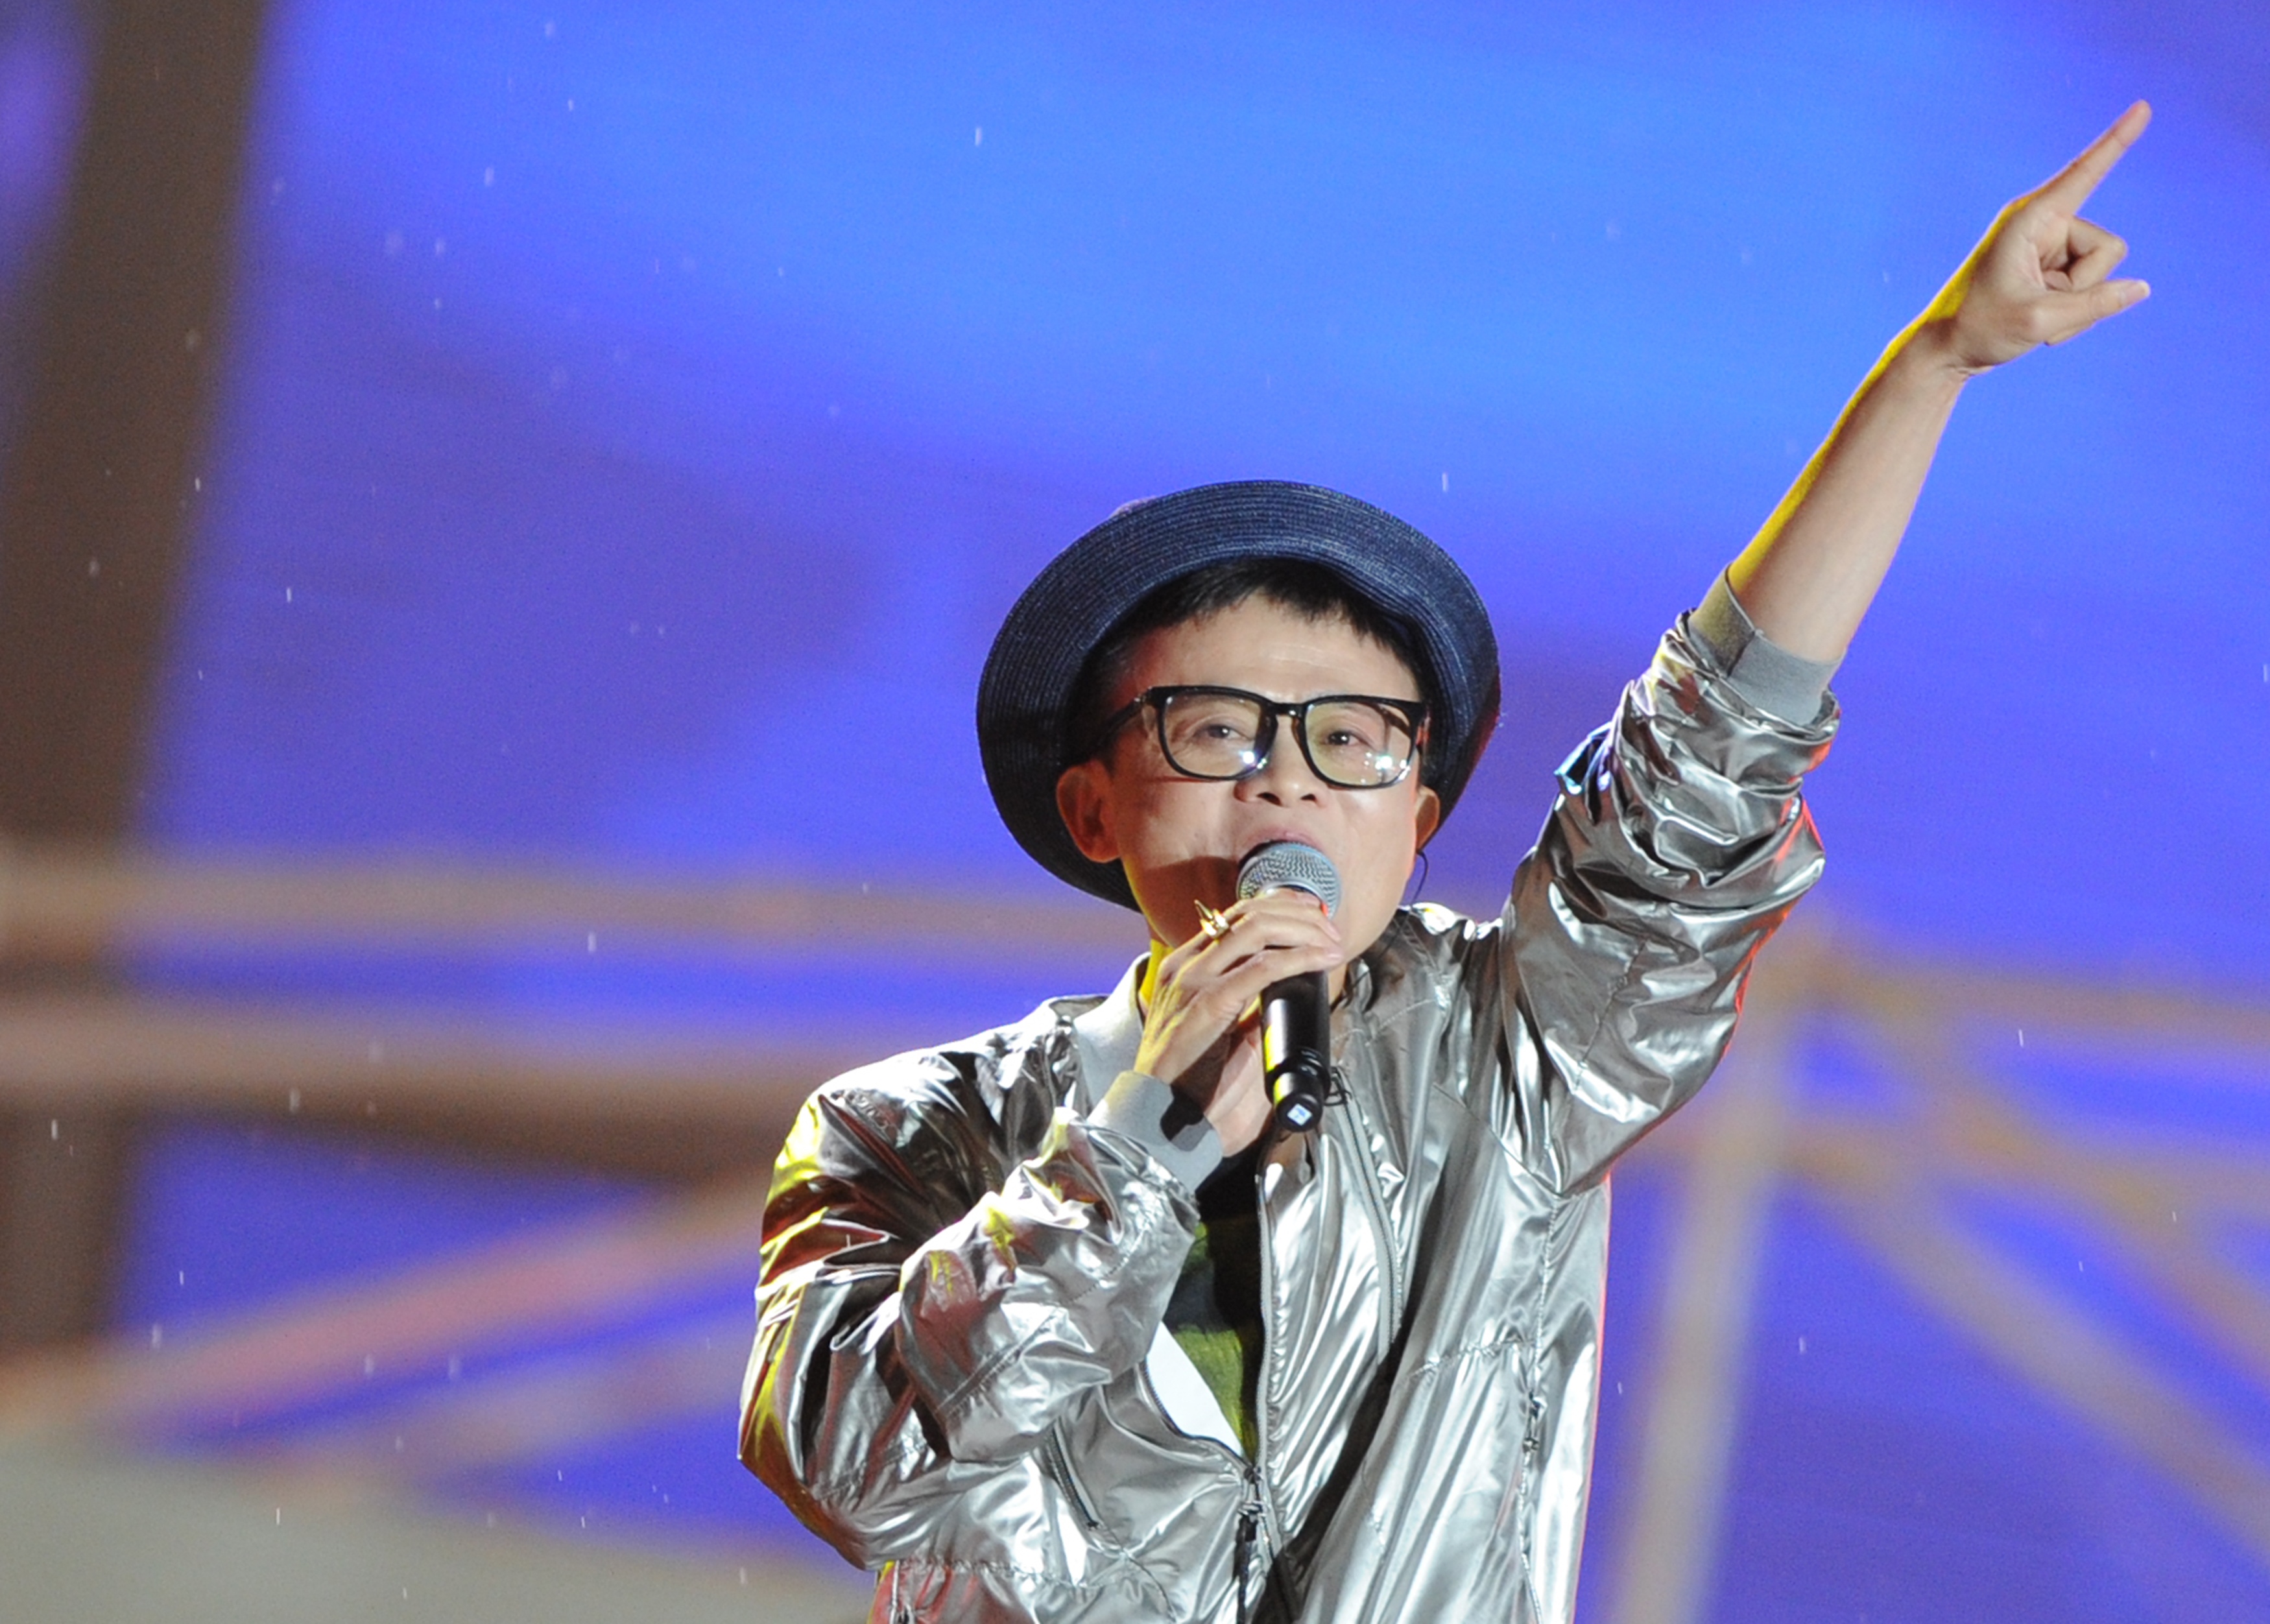 Yes, Ma really does love to sing. His onstage attire was a little less flamboyant by the time this 2013 photo was taken on the 10th anniversary of China's popular Taobao online marketplace, but he is still wearing a silver jacket and what looks like a Kangol.